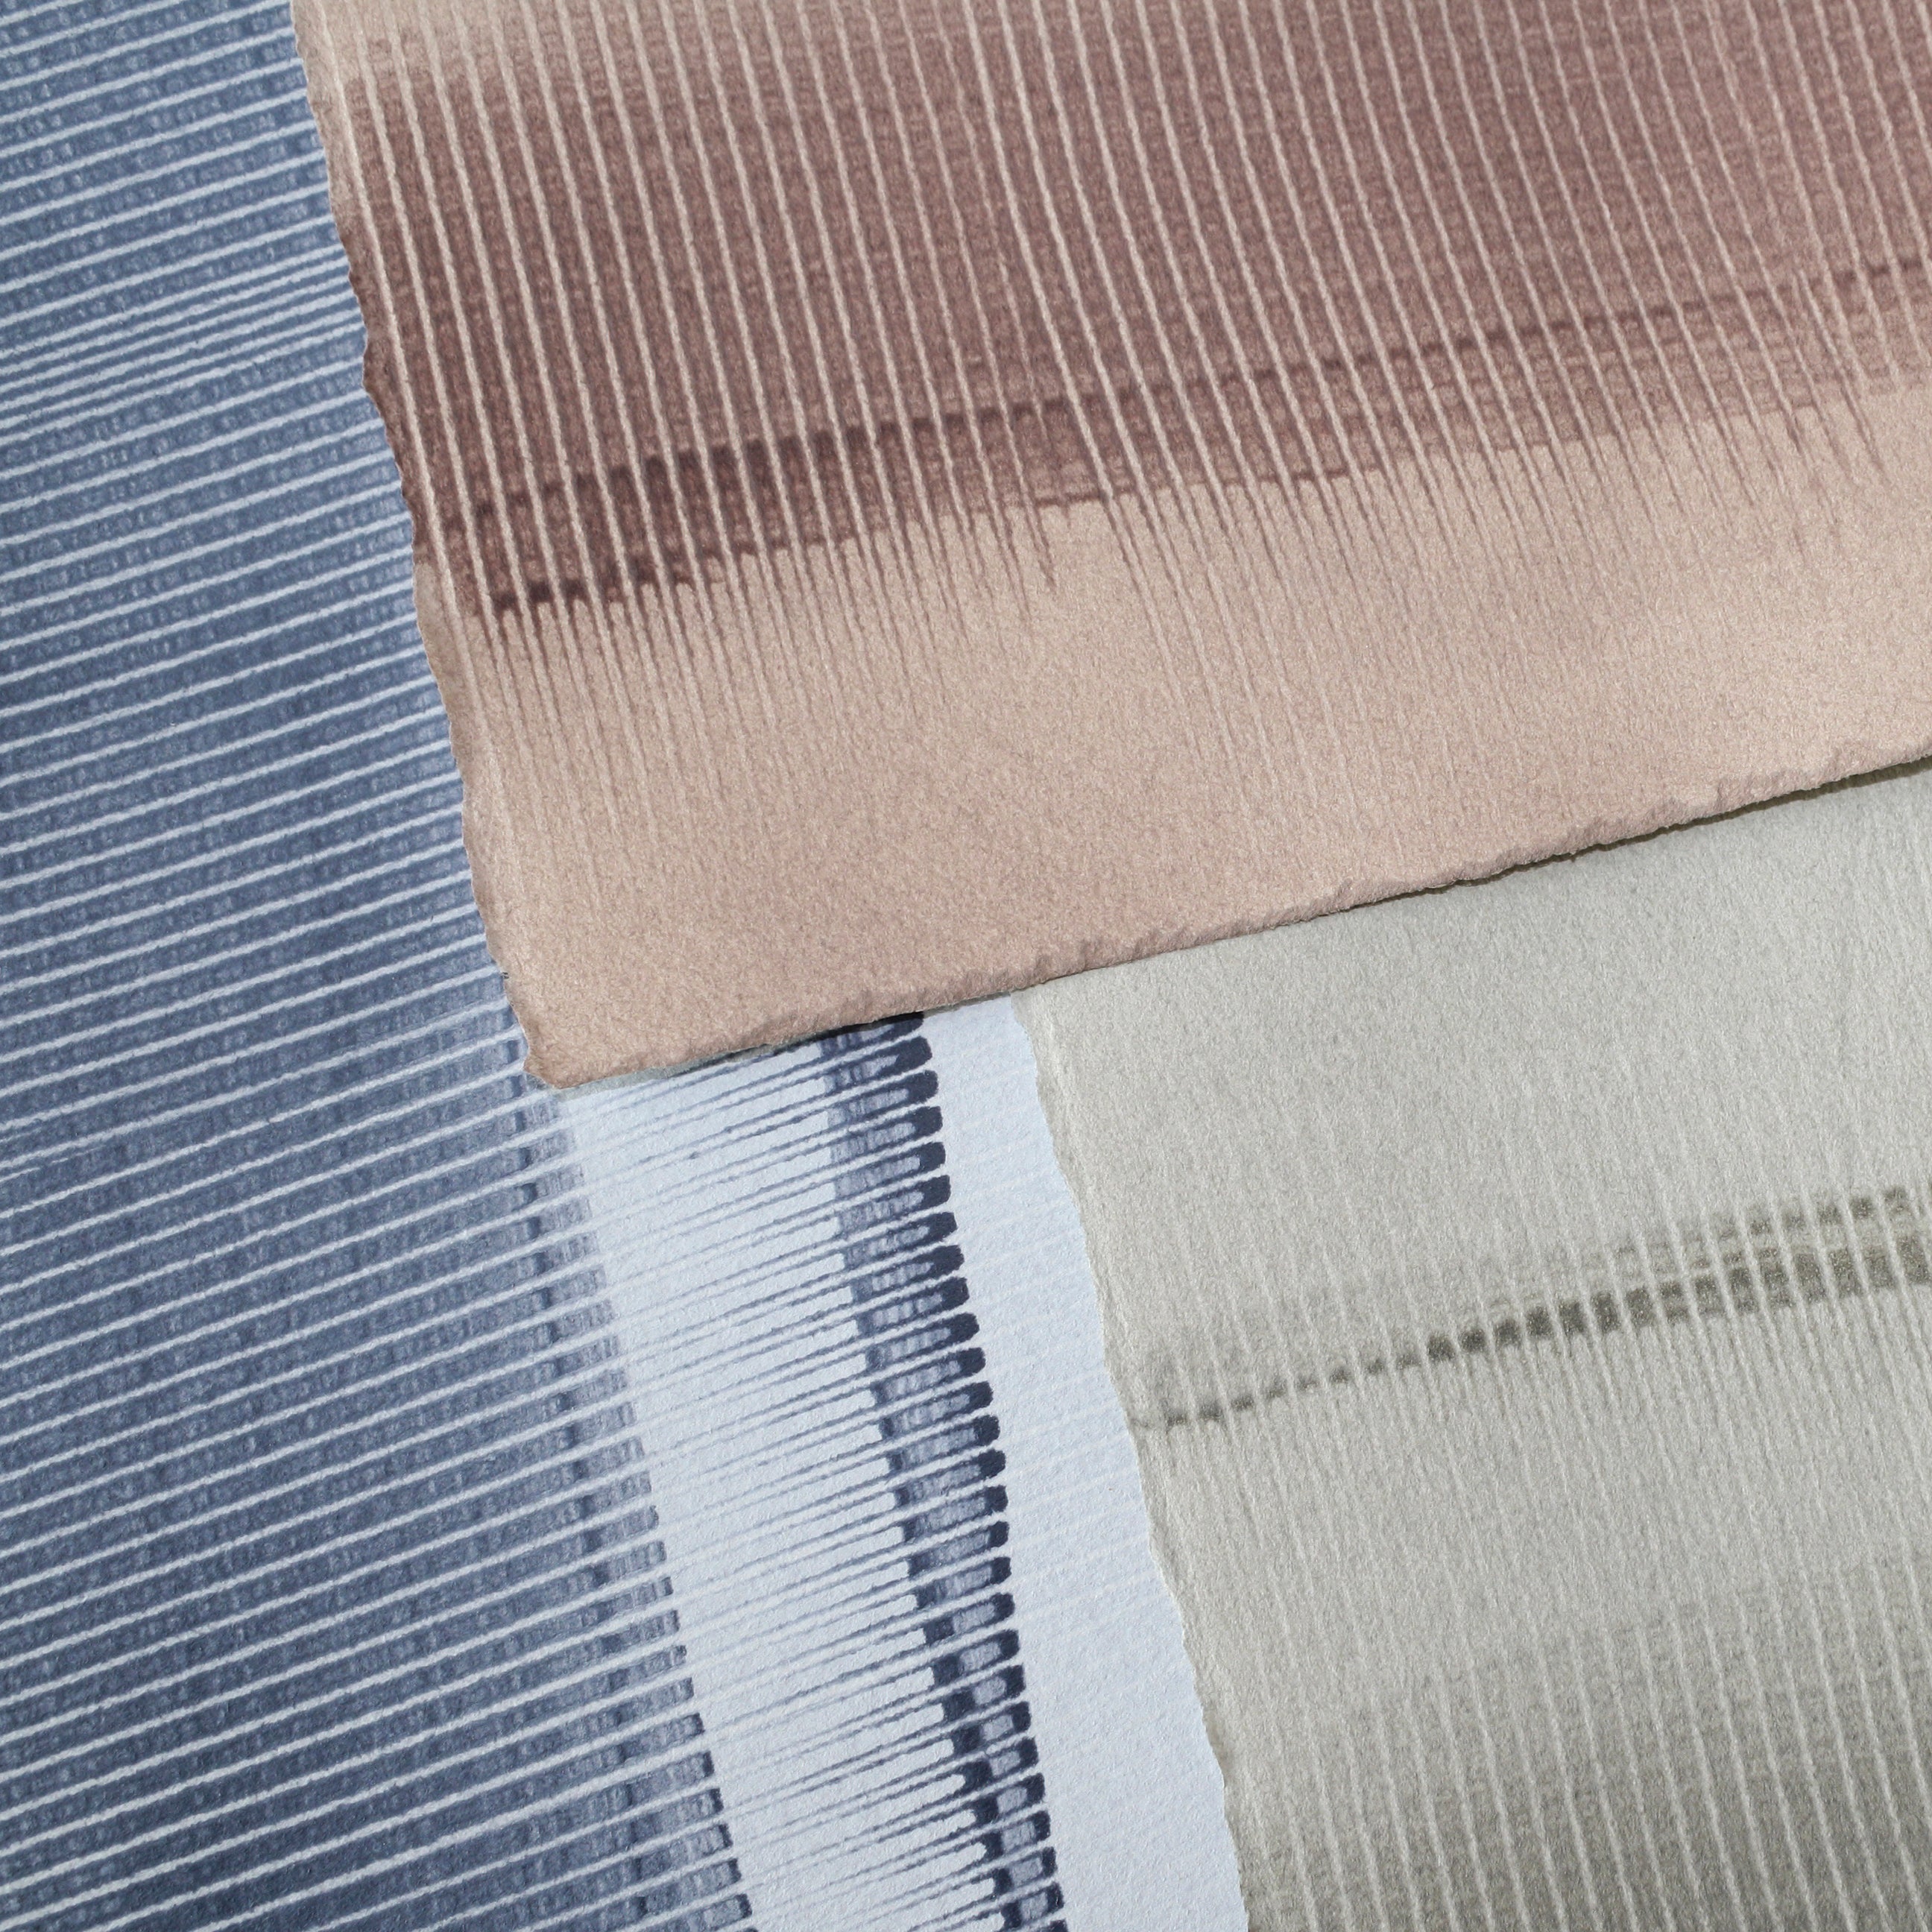 Pile of wallpaper swatches with dimensional combed patterns in navy, mauve and tan colorways.